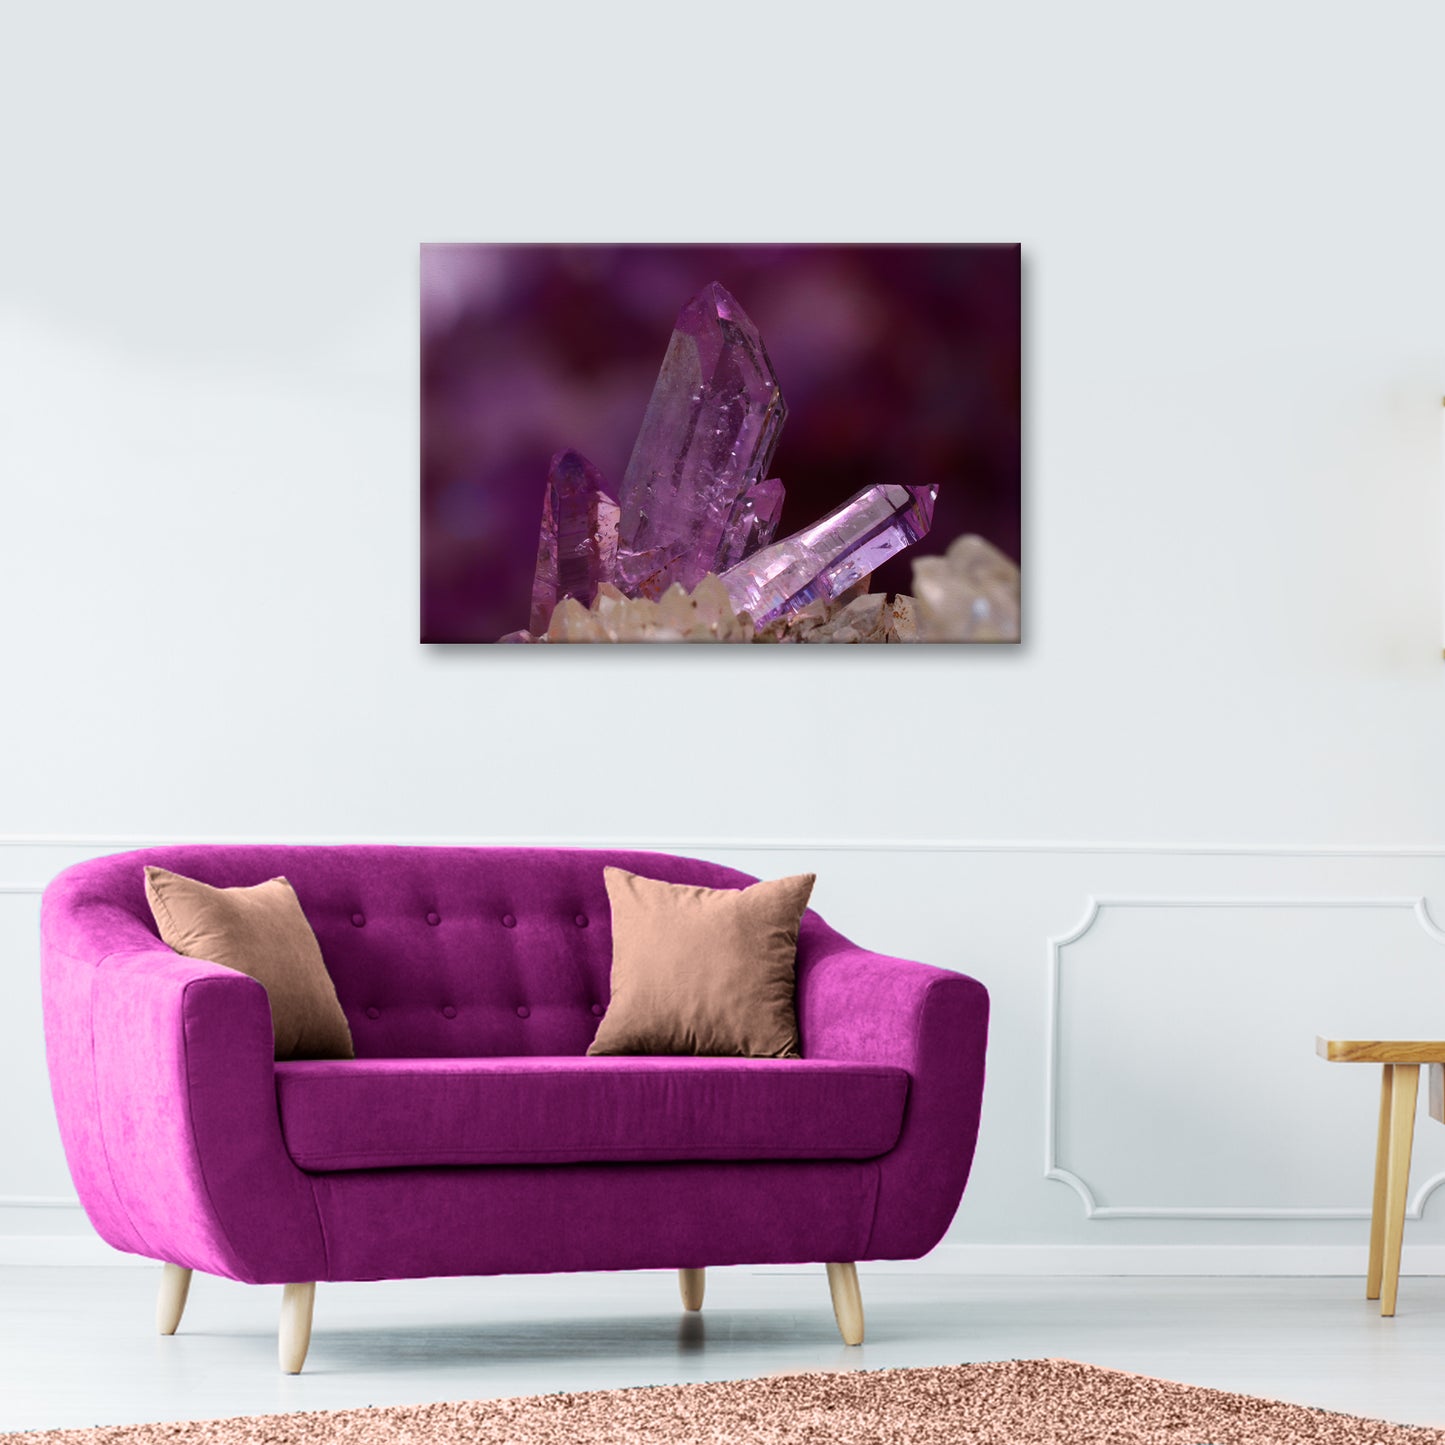 Decor Elements Crystals Purple Amethyst Canvas Wall Art - Image by Tailored Canvases